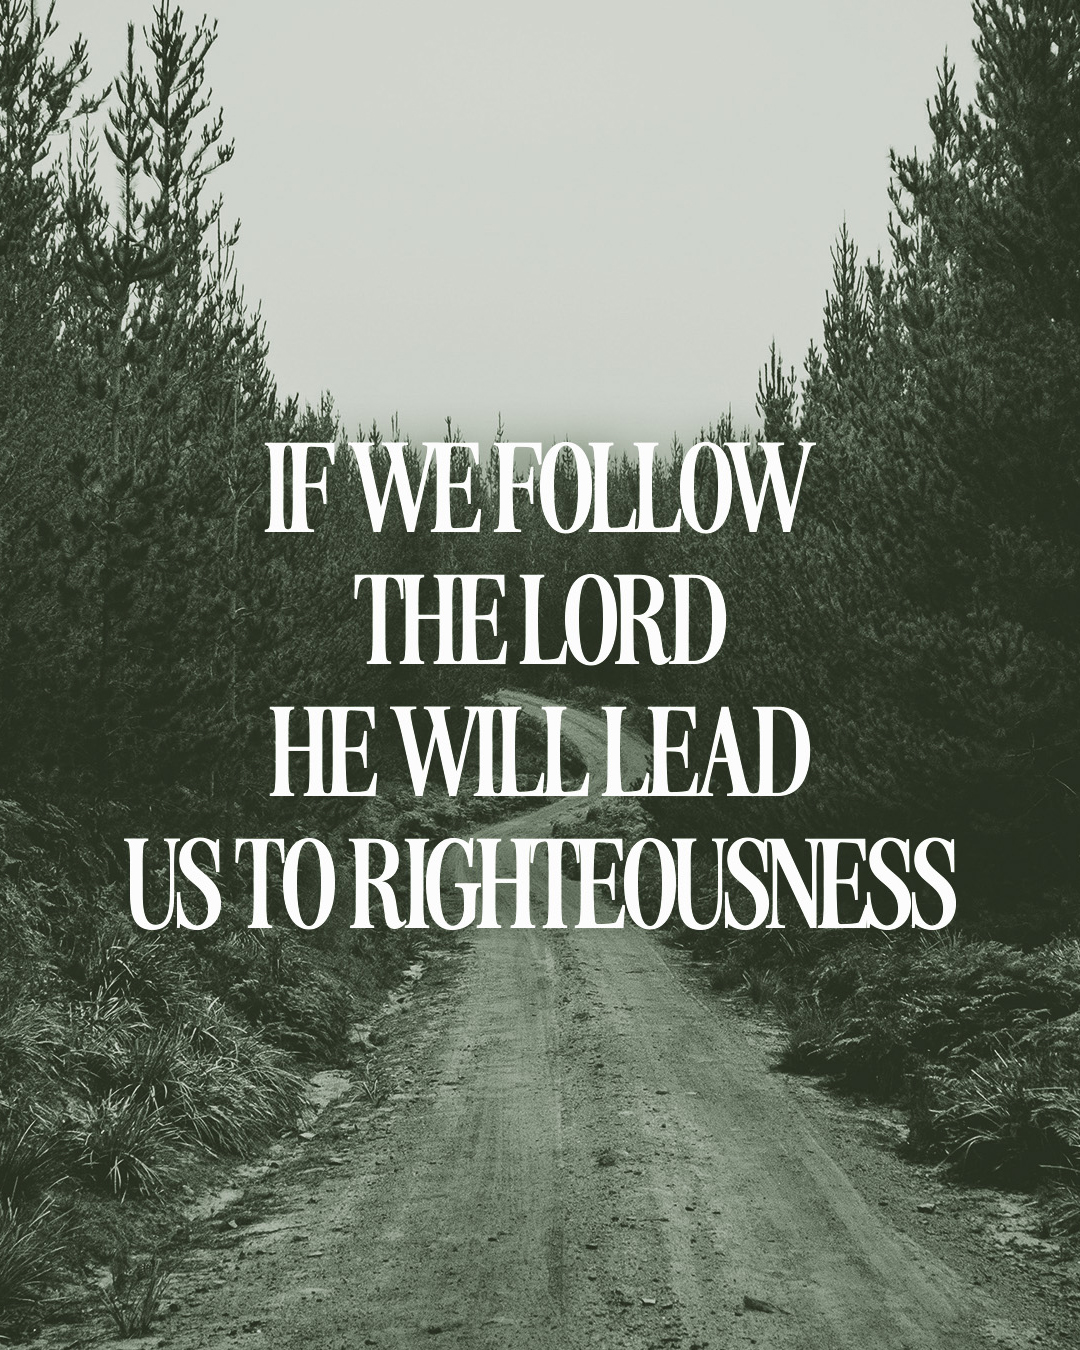 If we follow the Lord He will lead us to righteousness